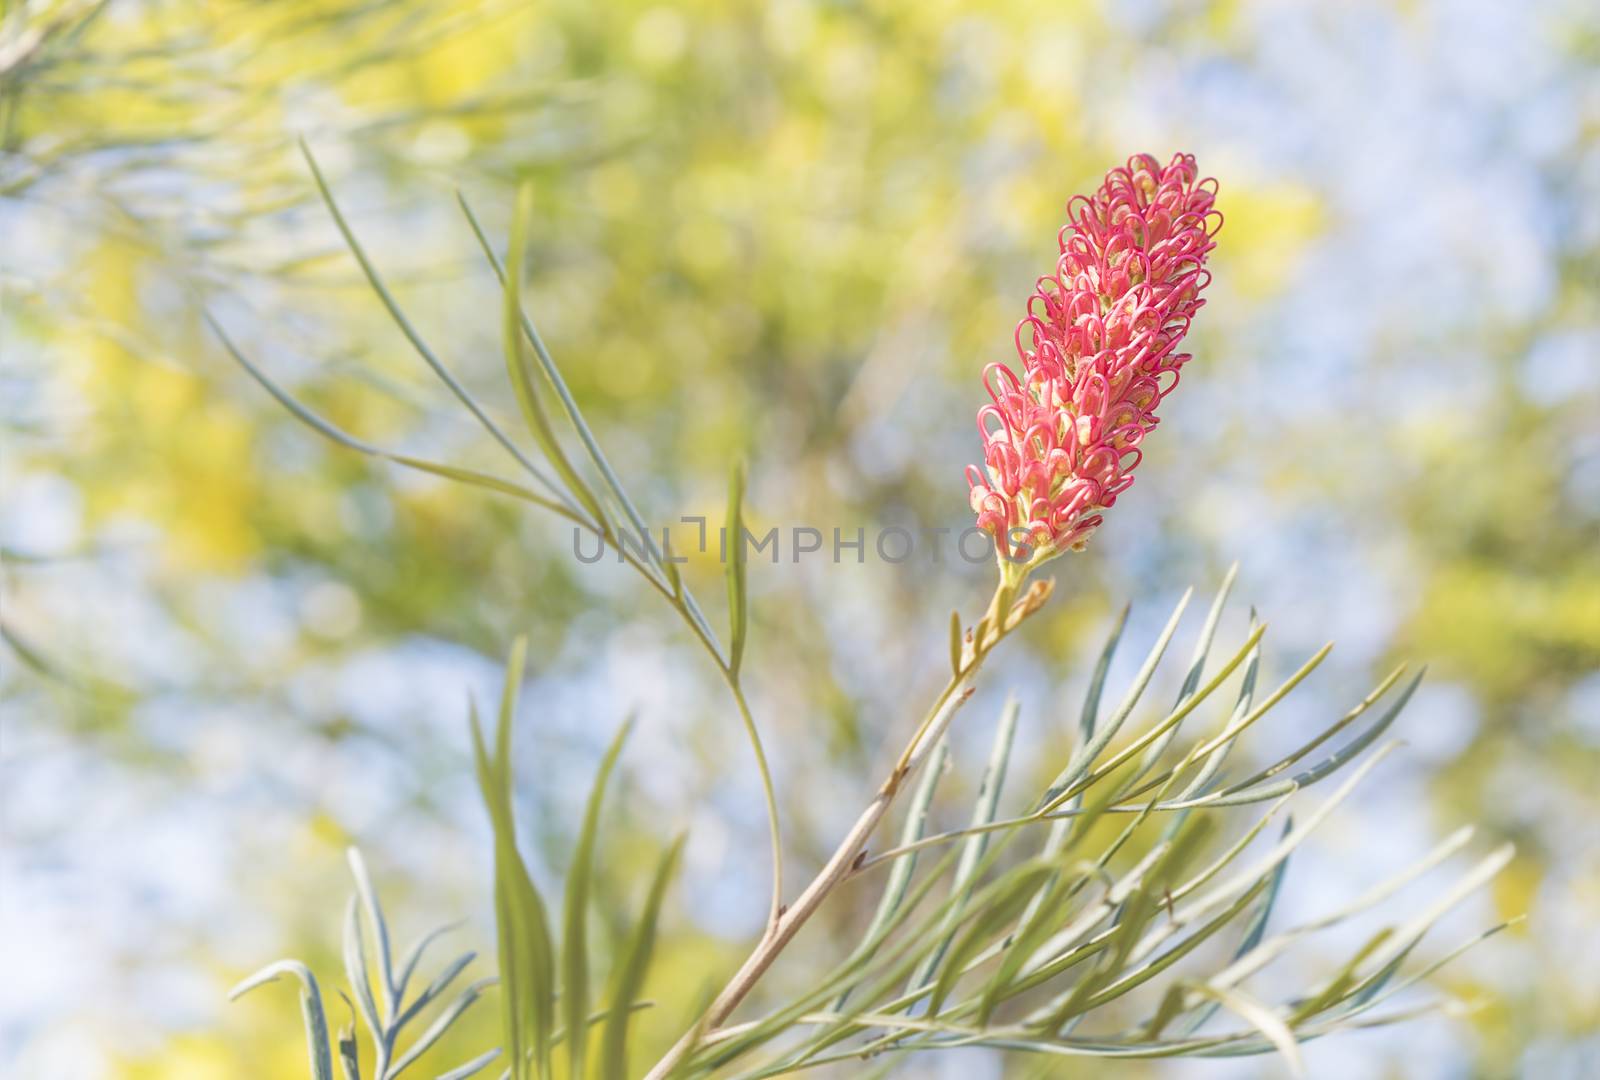 Grevillea with pink spider flower by sherj